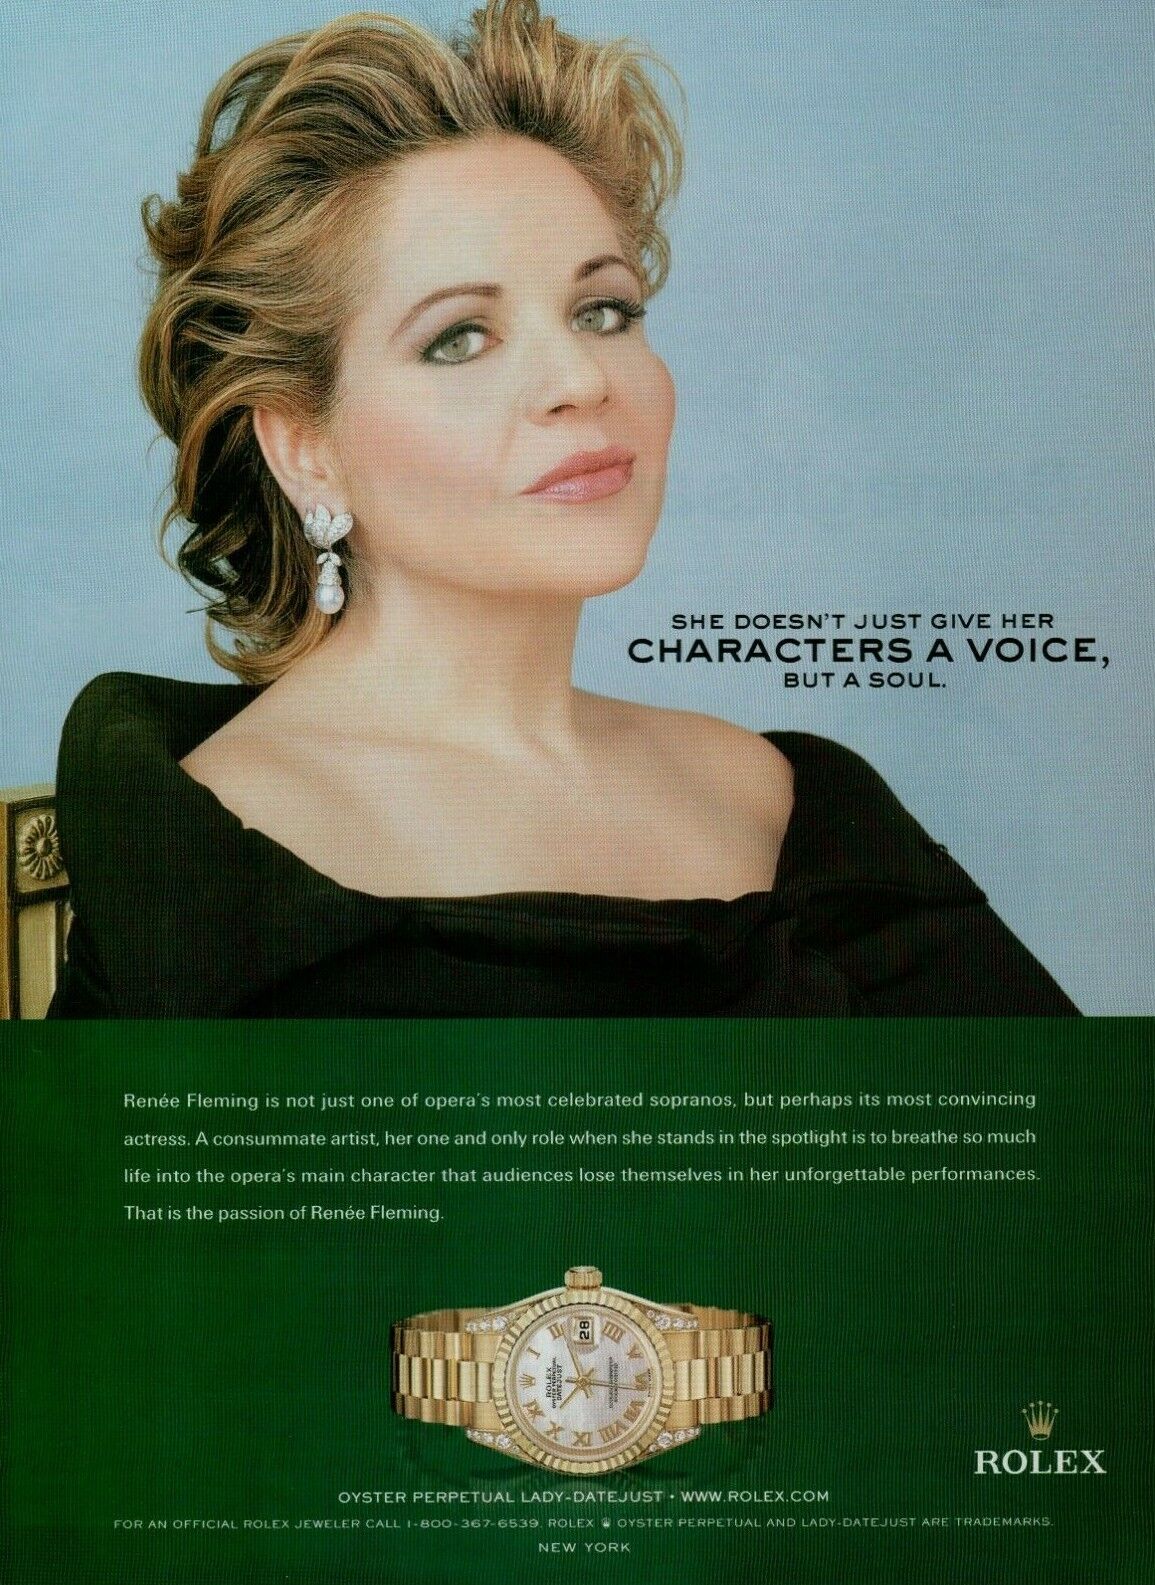 2004 Rolex Oyster Perpetual Lady-Datejust Renee Fleming Watch Vintage Print Ad